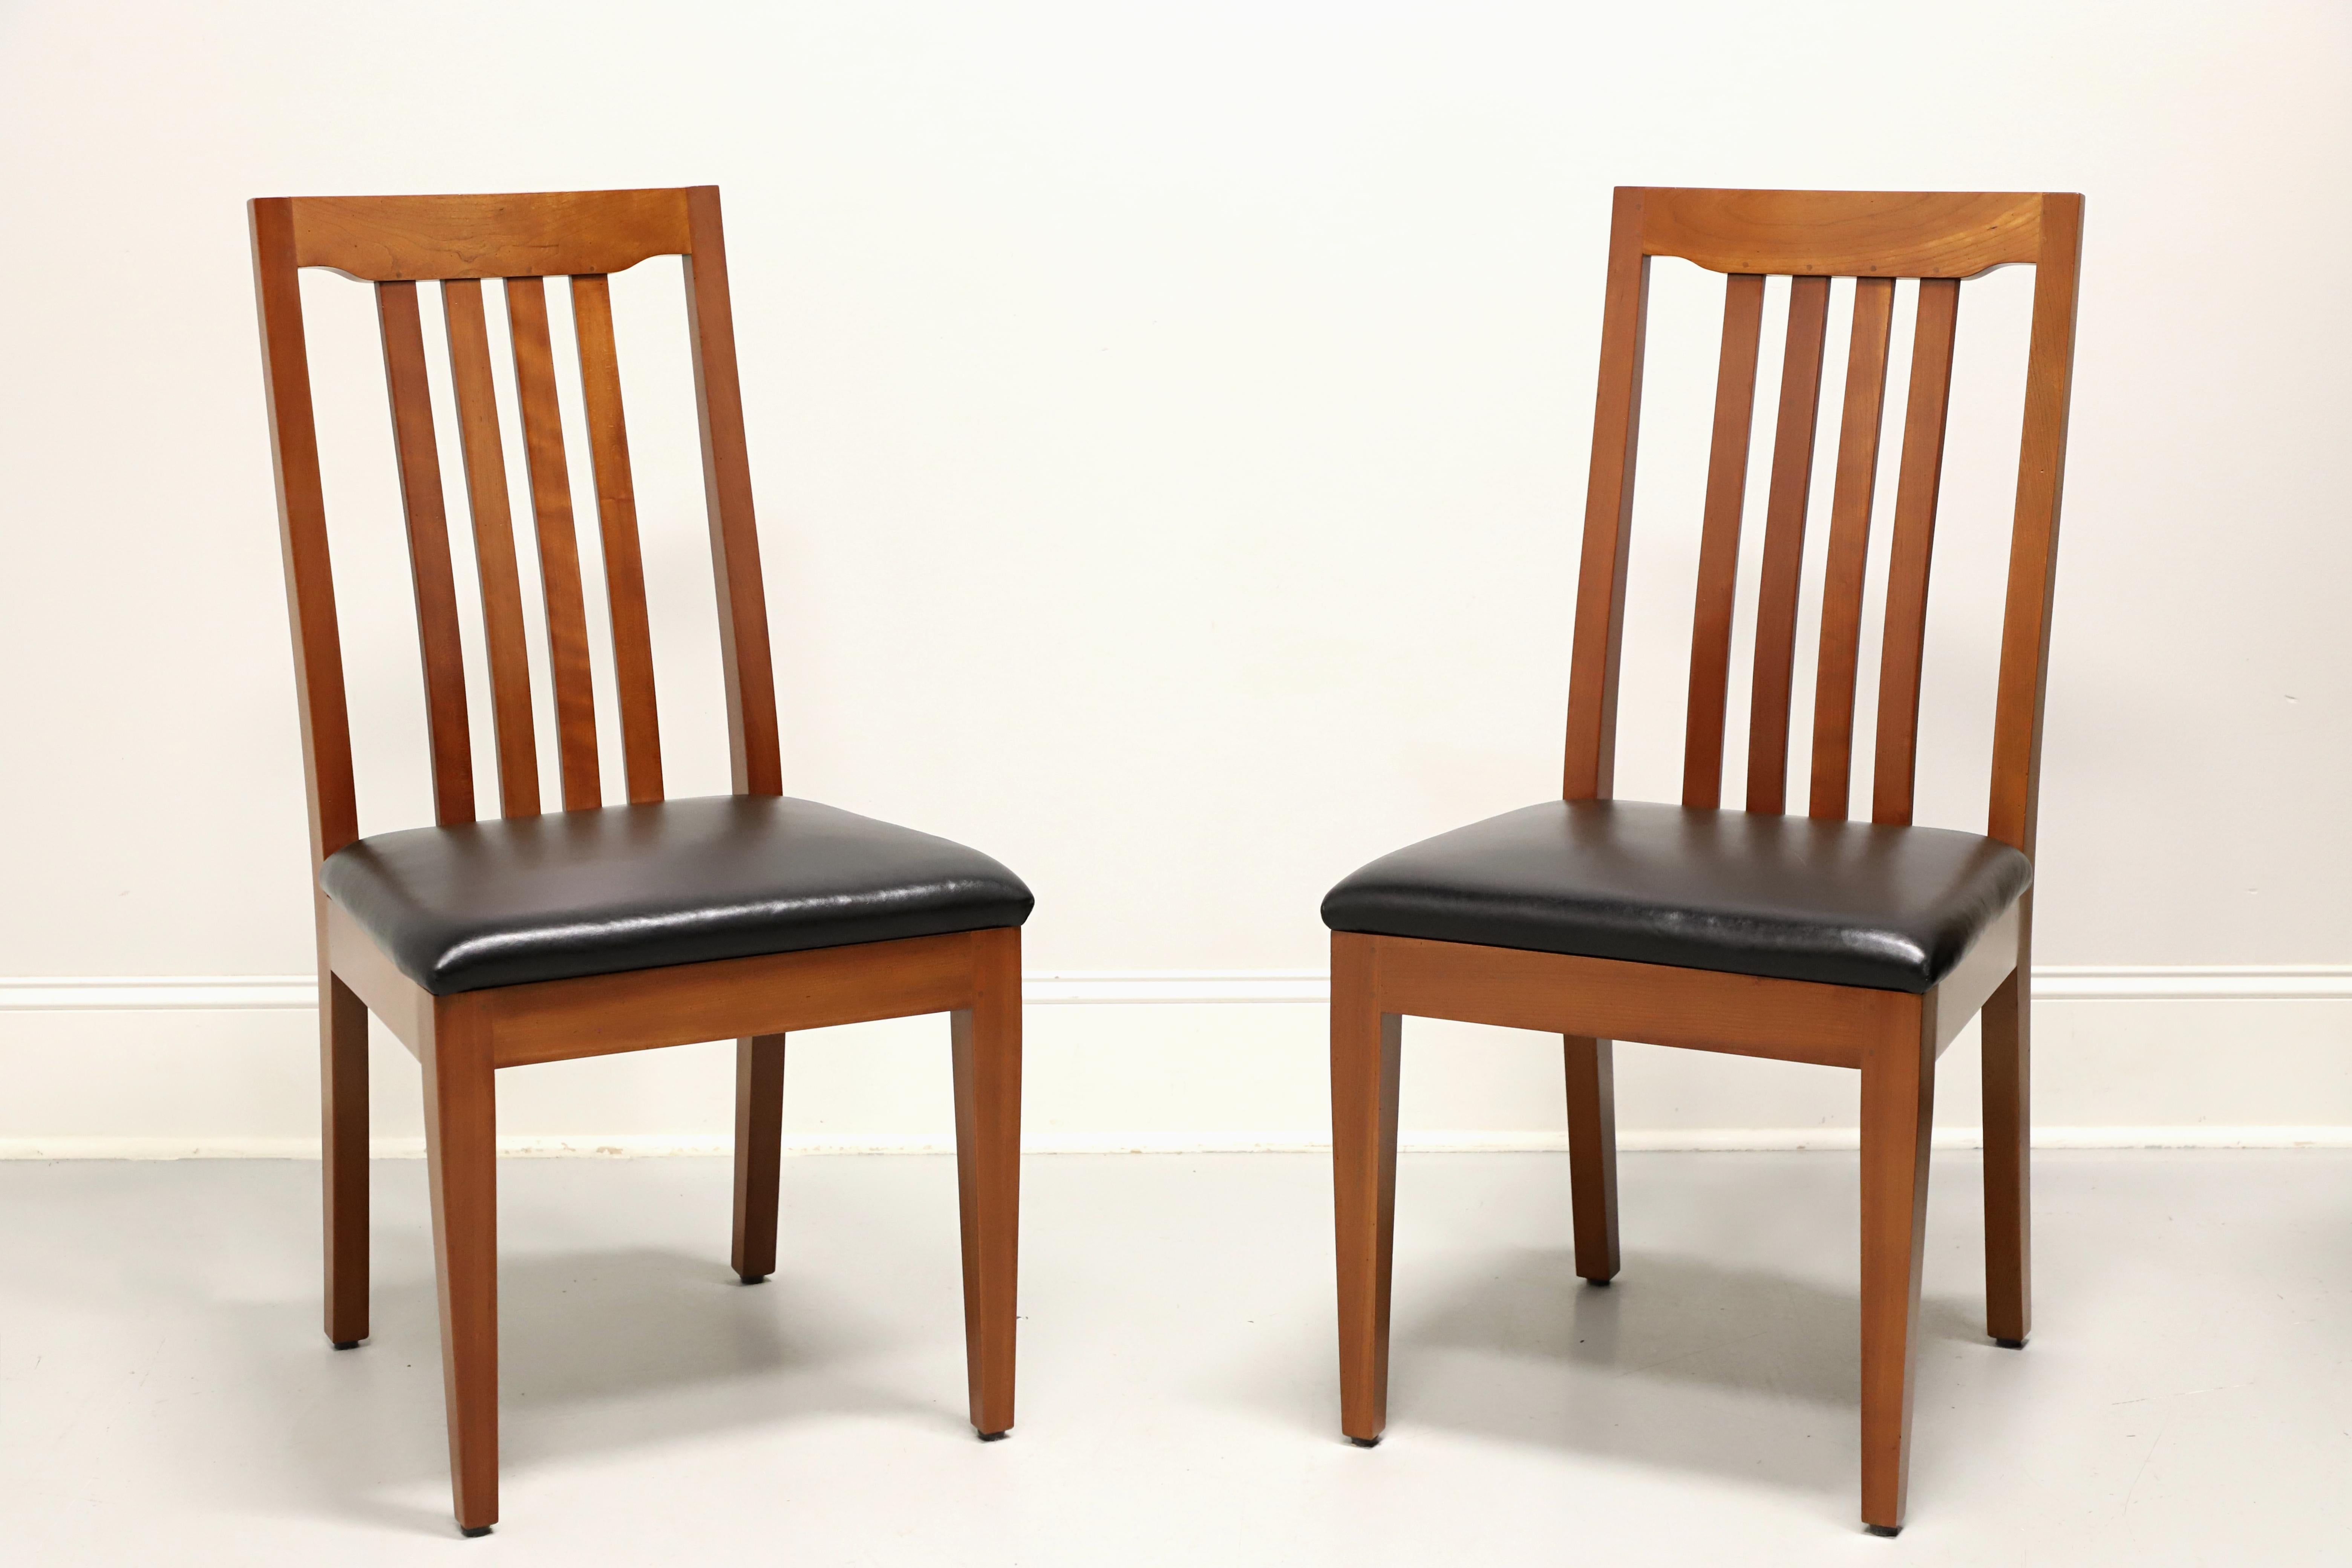 ROBERT BERGELIN Custom Solid Cherry Mission Dining Side Chairs - Pair C For Sale 4